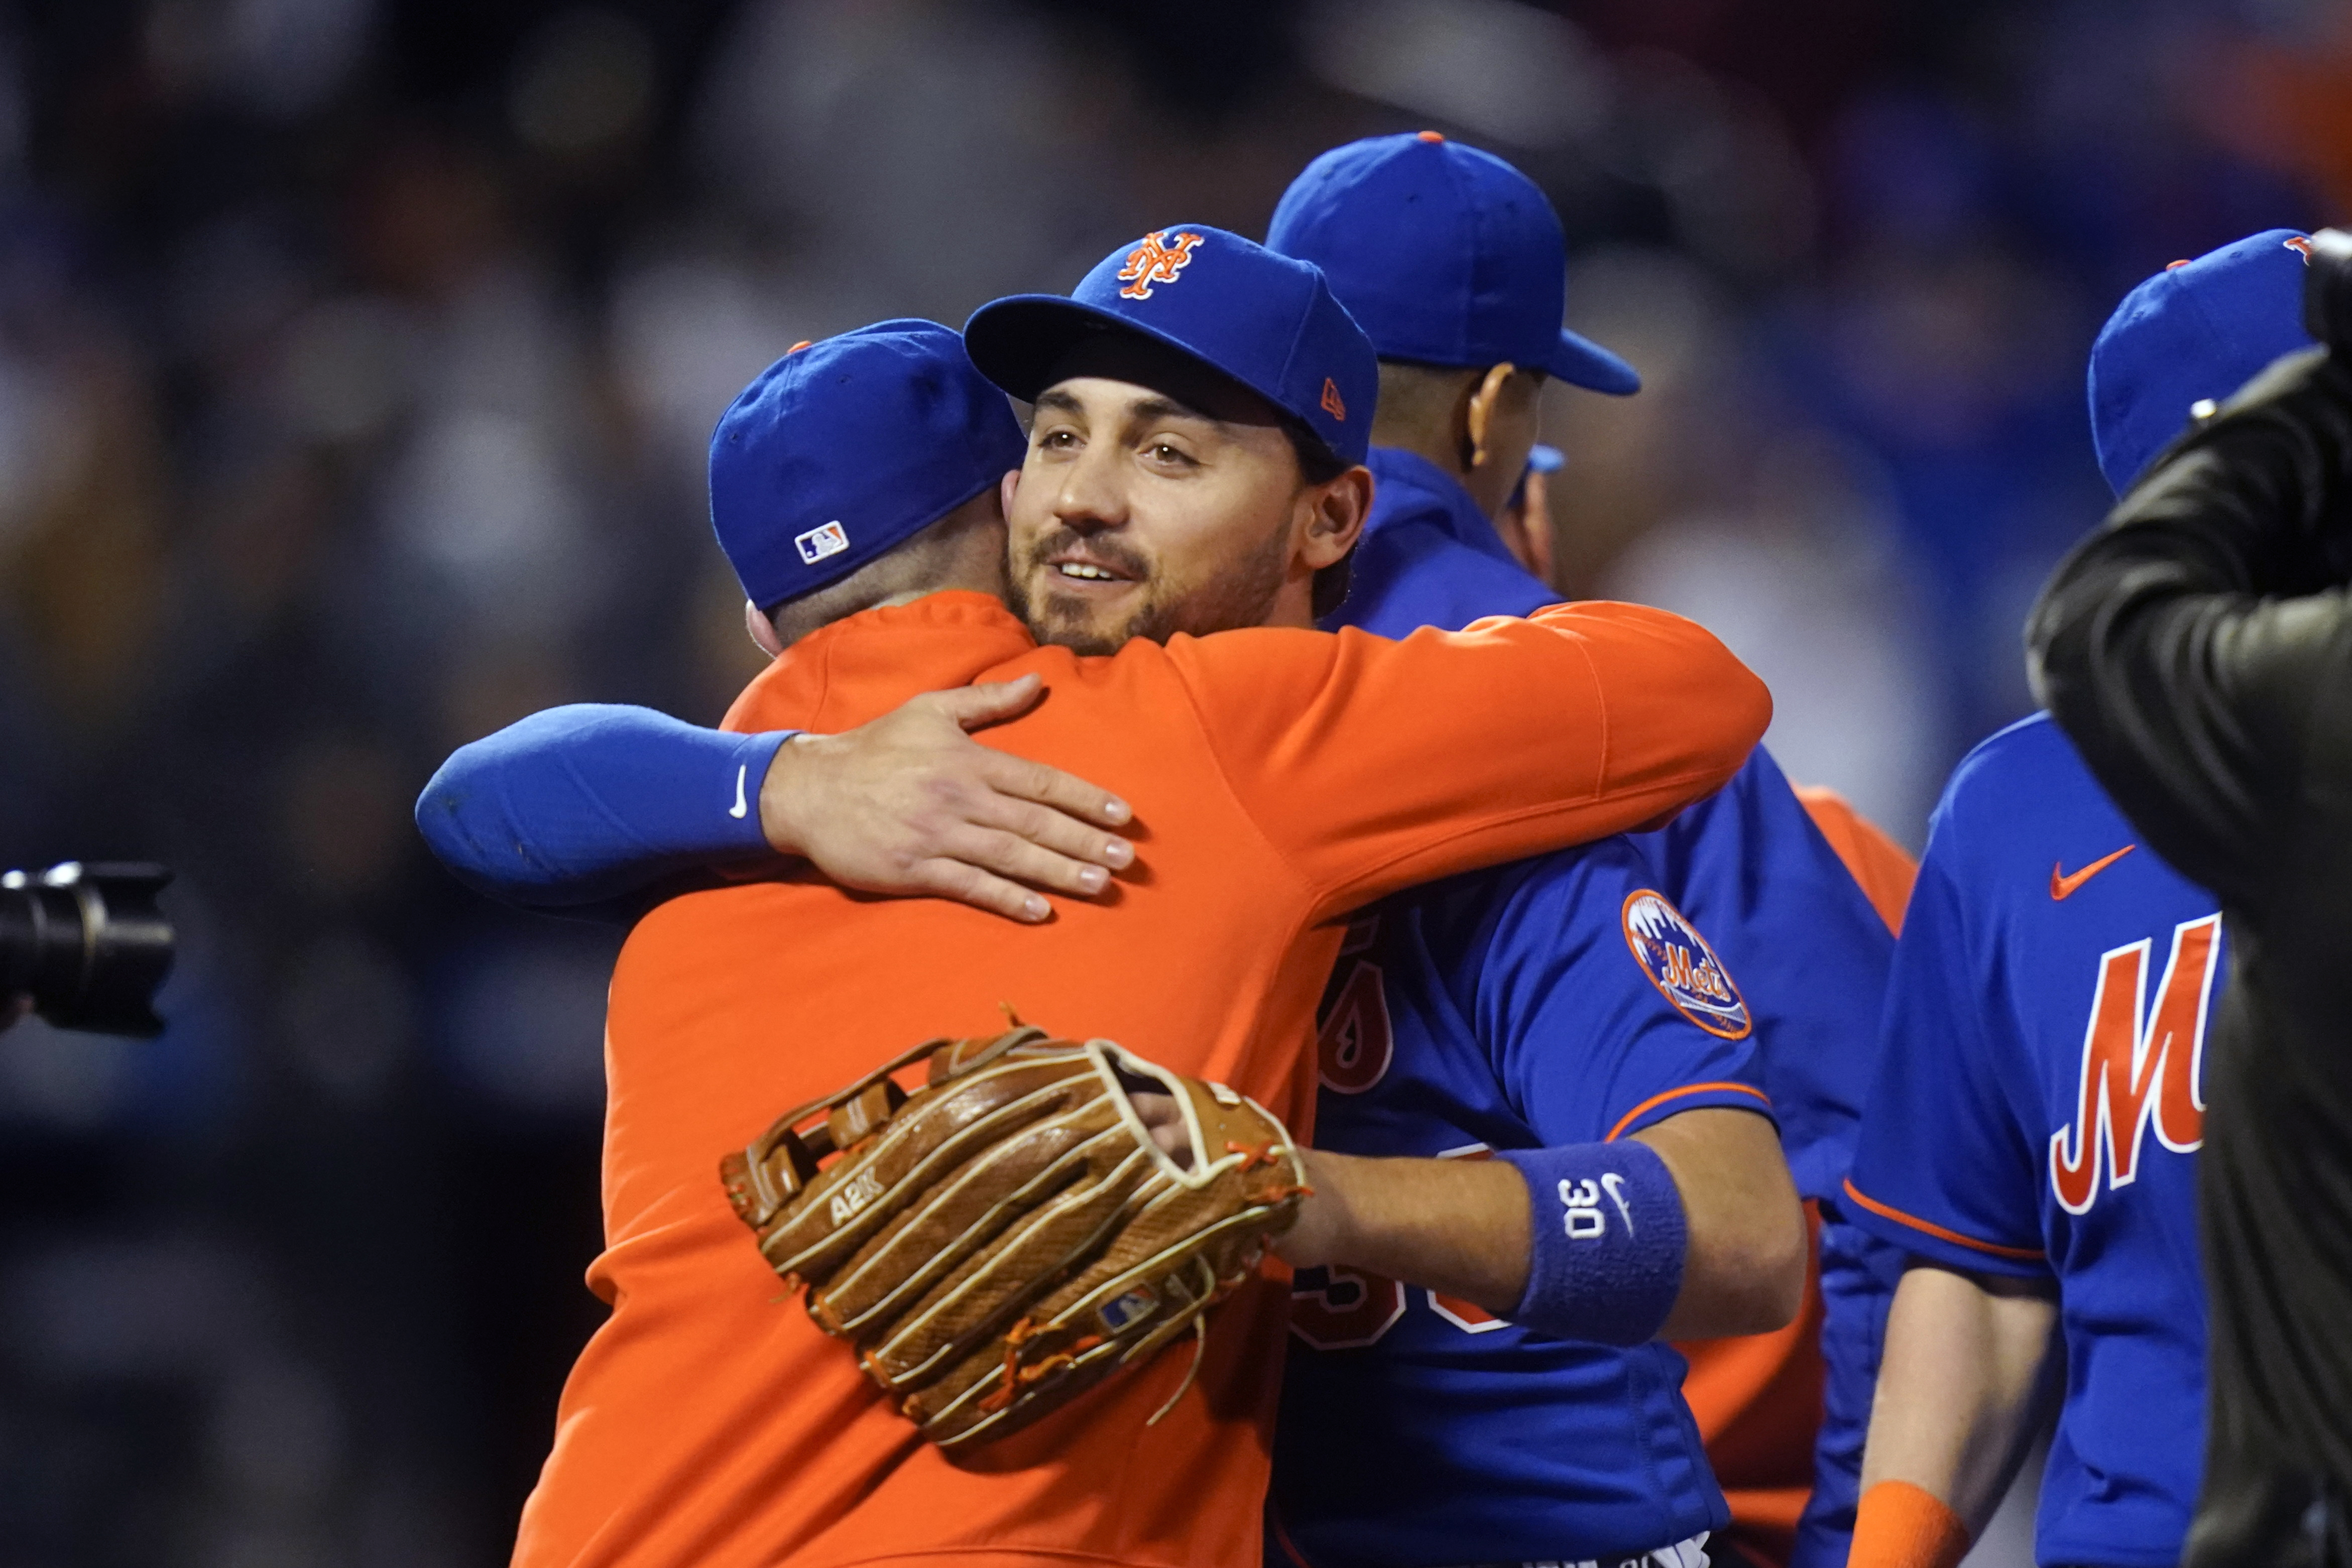 Mets' Michael Conforto recounts emotional night with future up in